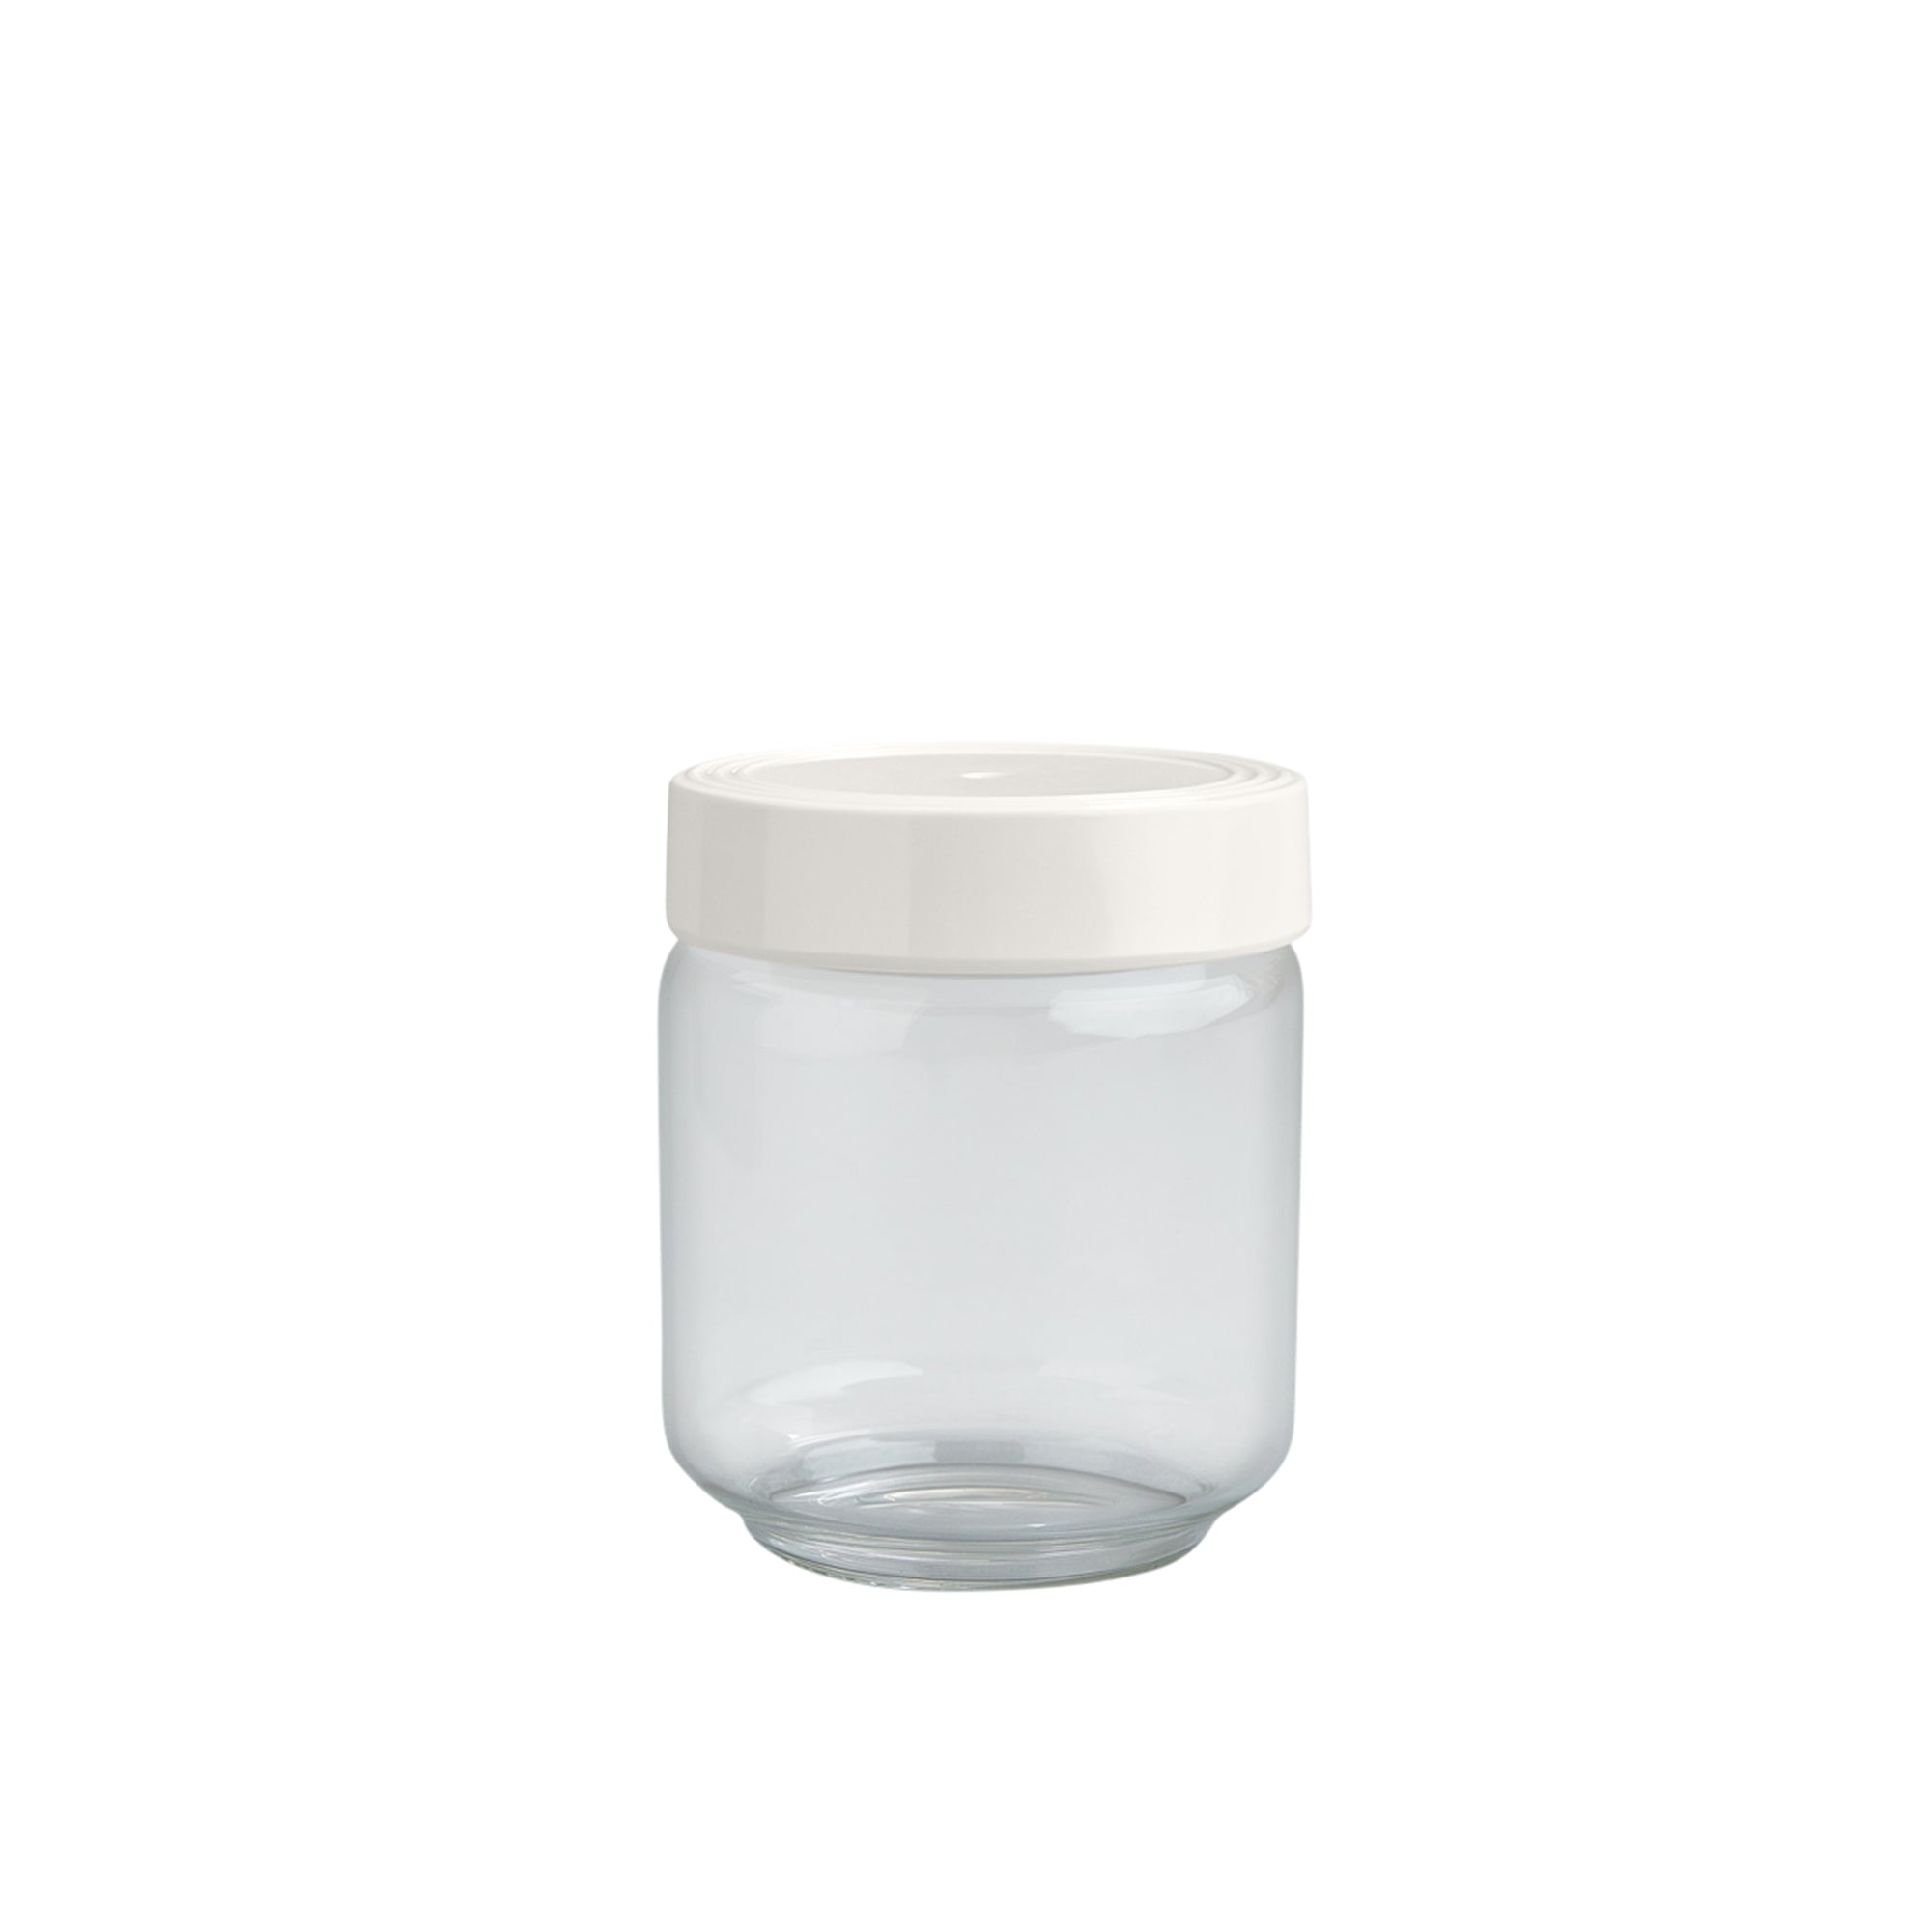 Nora Fleming Medium Canister w/Top